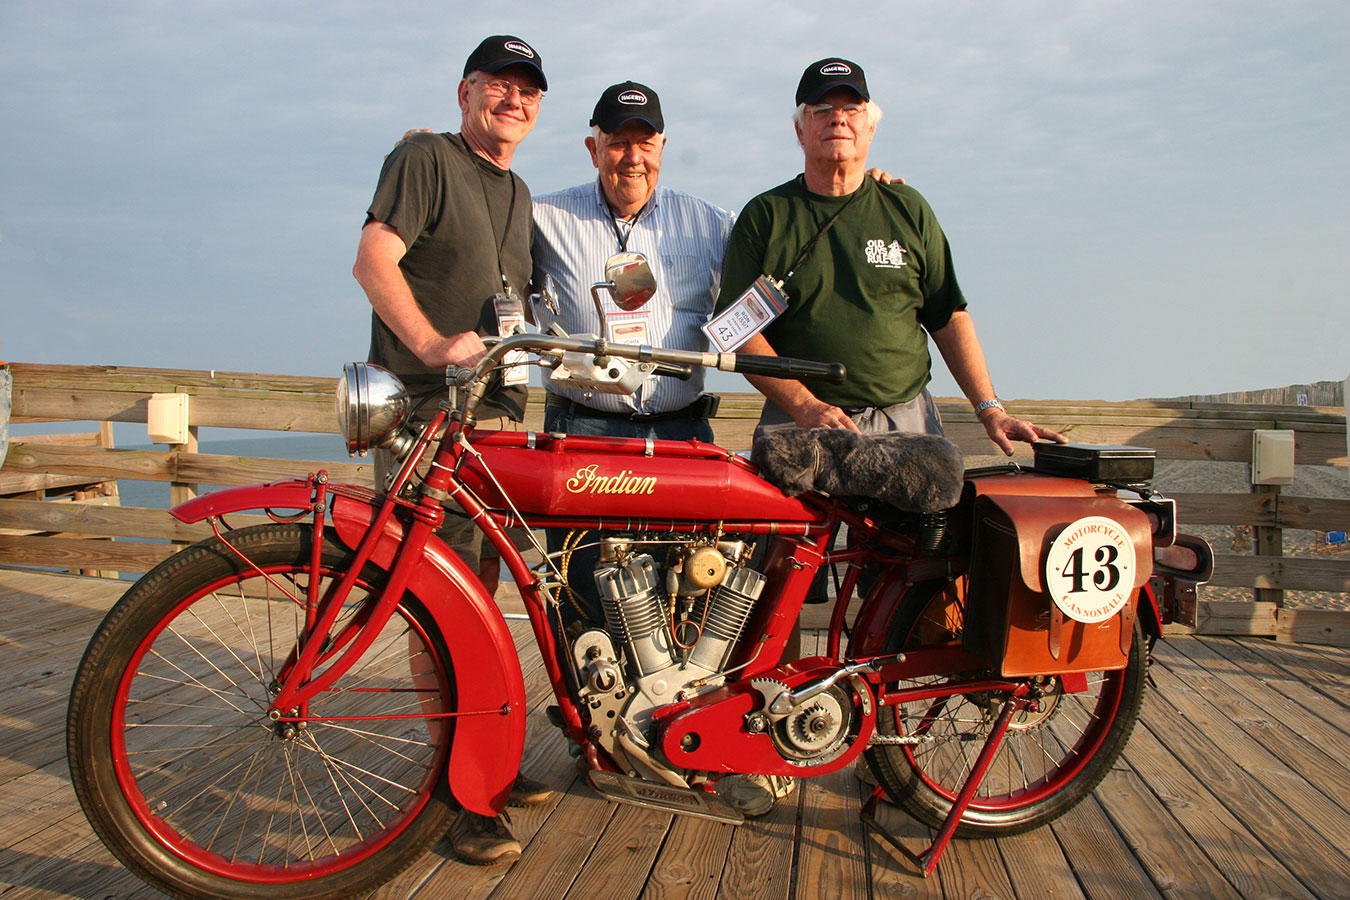 Riders stop at a variety of locations along the way, including Harley-Davidson of Bloomington on September 13, where the public can see these century-old bikes in person. | Courtesy photo